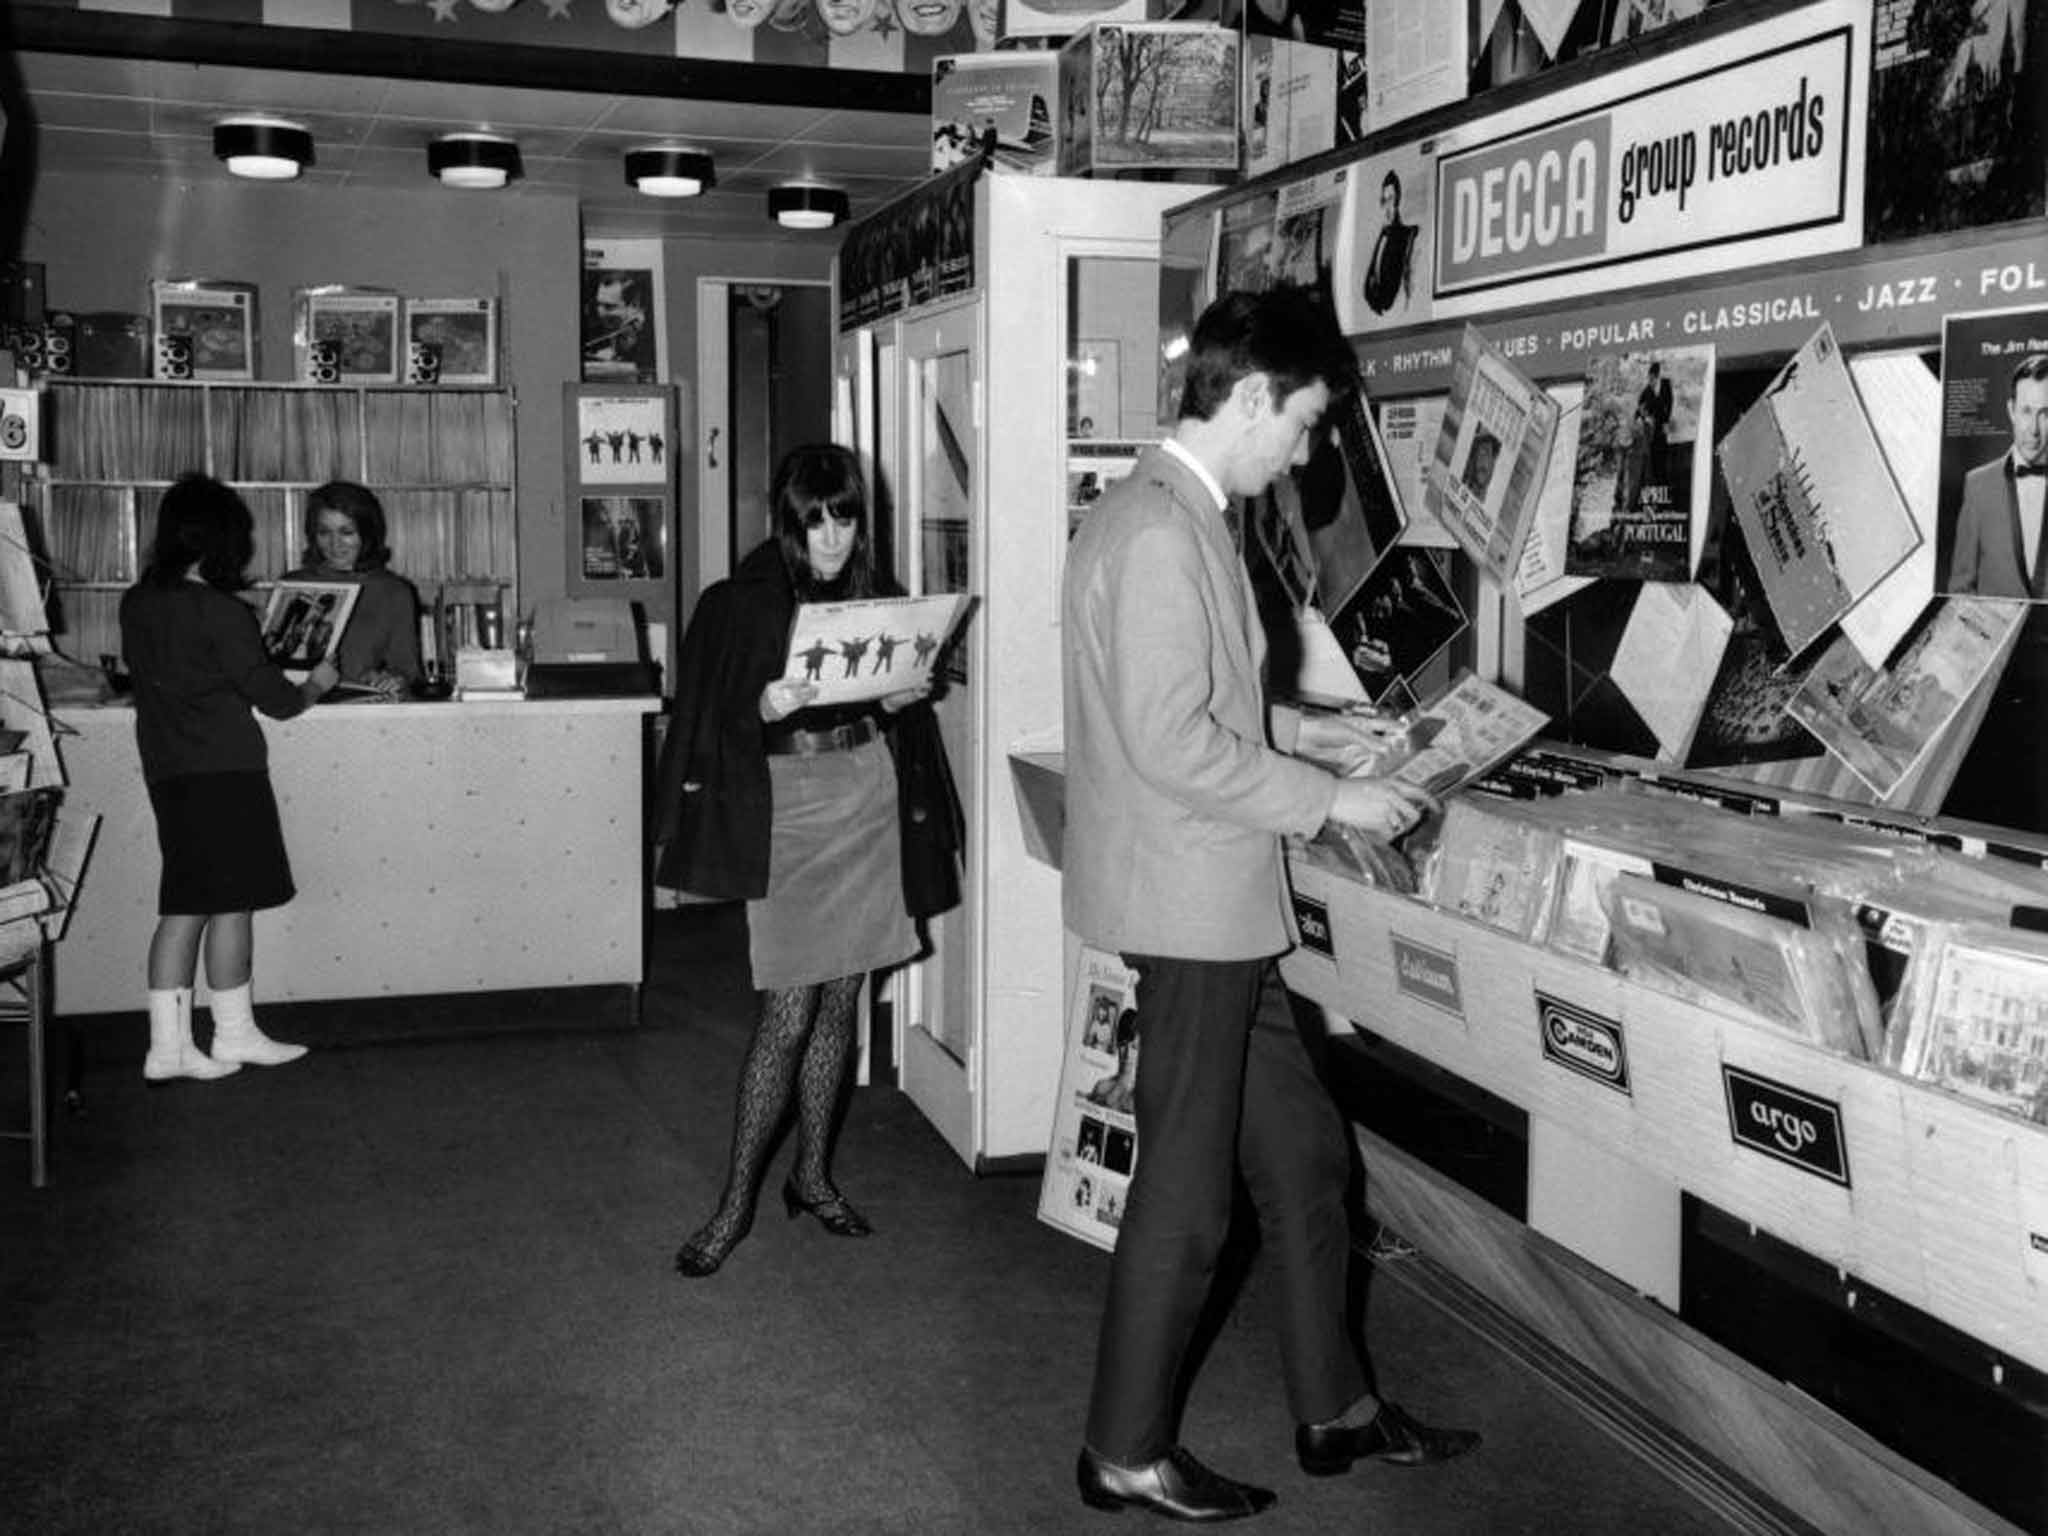 The way we were: teenagers looking at the latest albums in a record shop, 1965